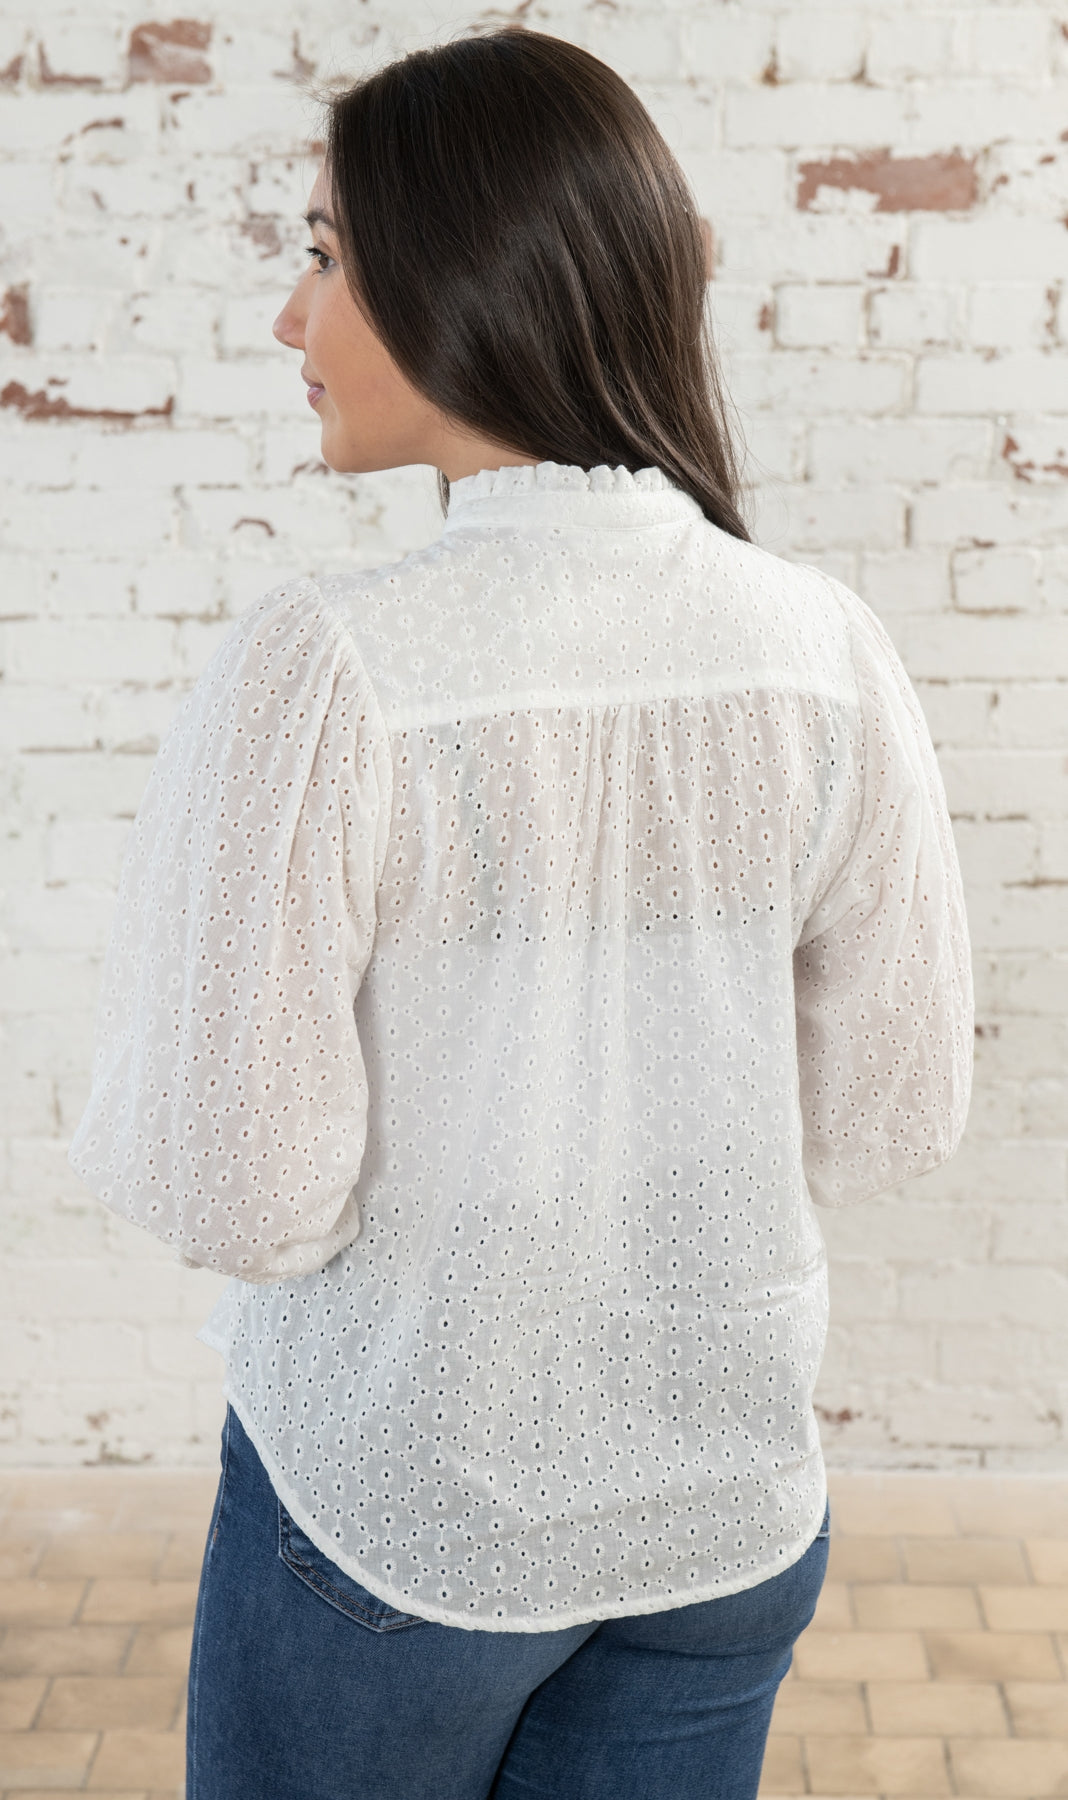 Lighthouse women's Lola blouse in a sheer white Broderie Anglaise fabric.